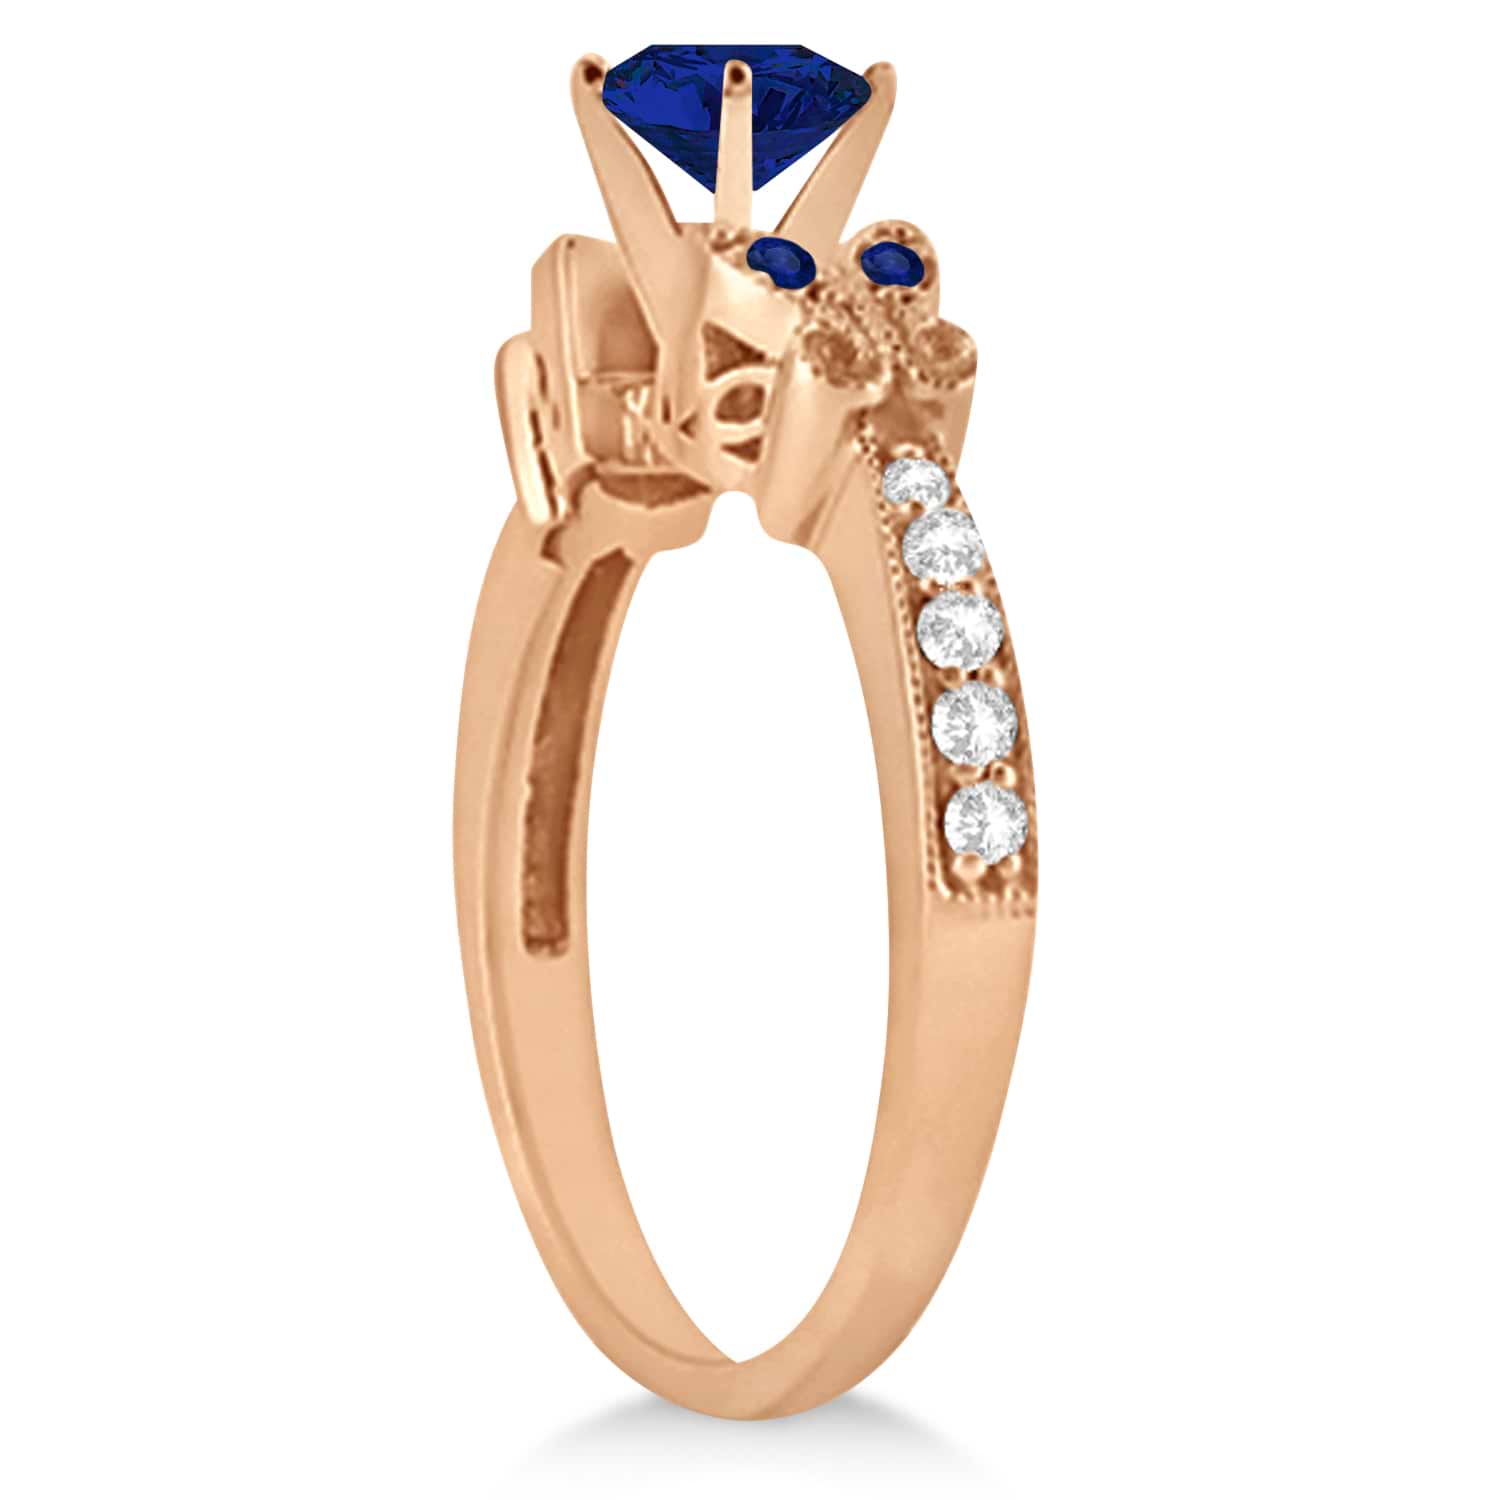 Butterfly Blue Sapphire & Diamond Engagement Ring 14K Rose Gold 1.28ct